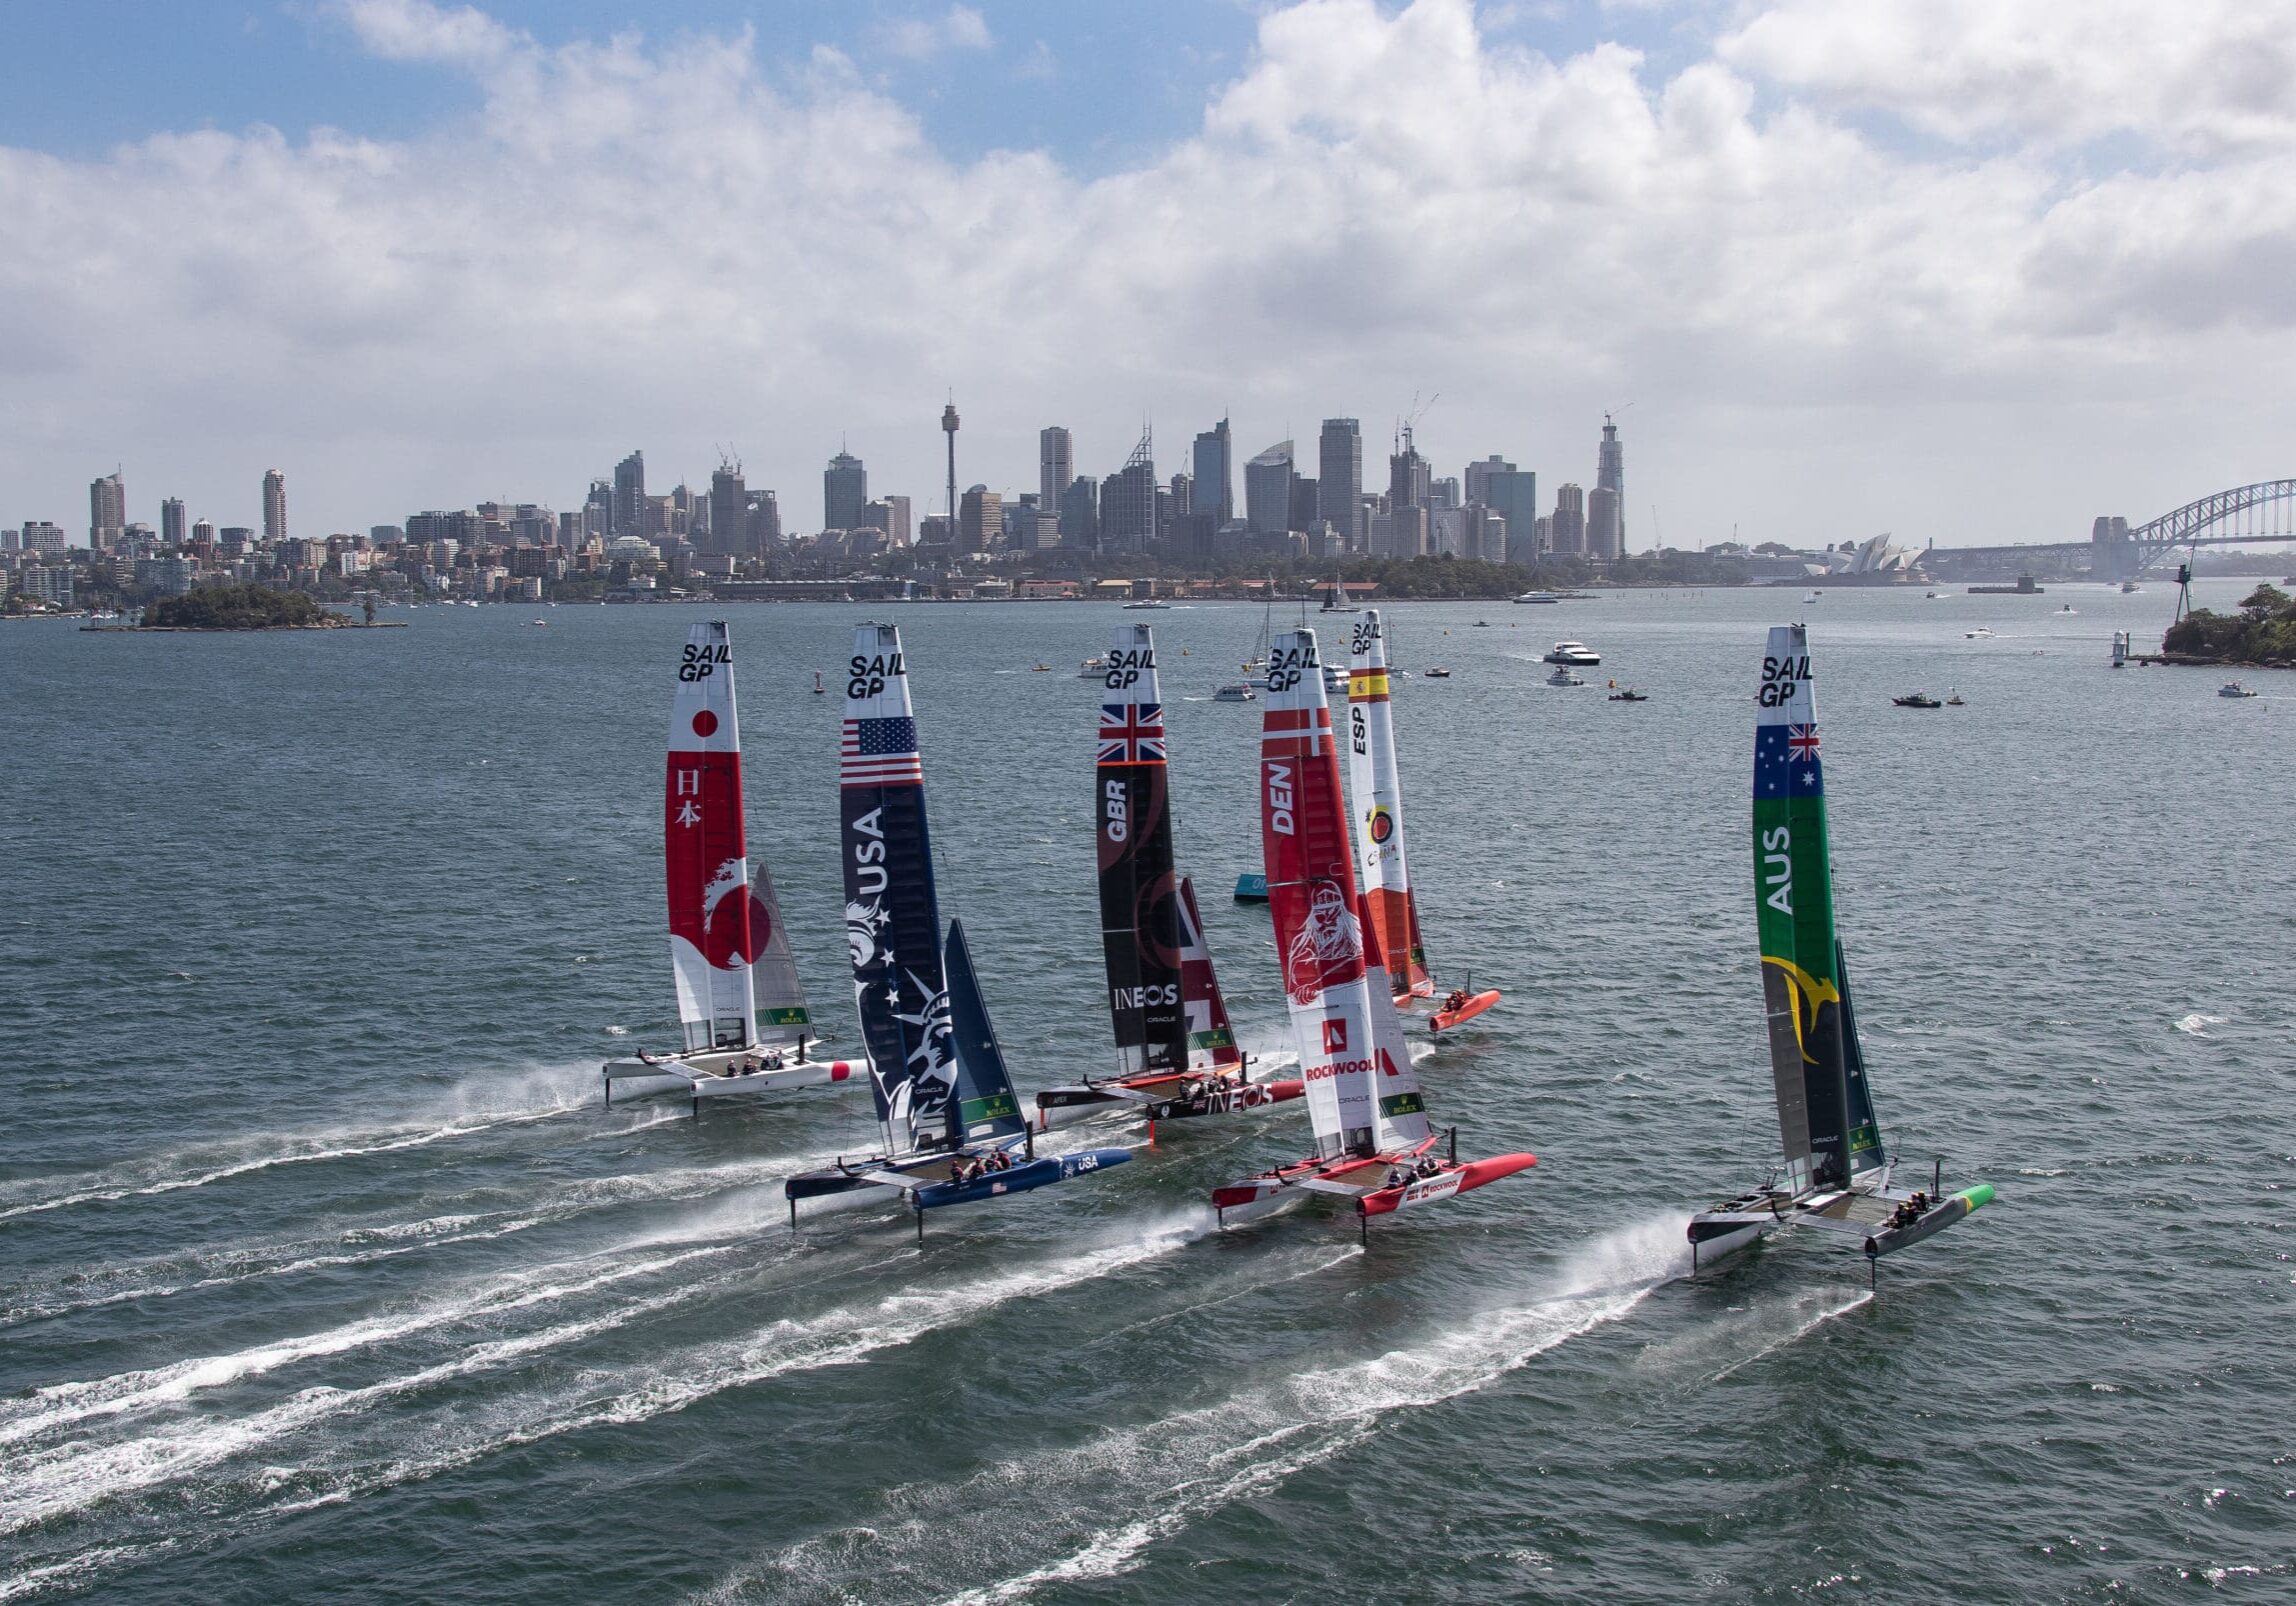 Aerial view of the fleet racing side by side with Sydney Harbour Bridge in the distance, during practice ahead of the Sydney SailGP, Event 1 Season 2 in Sydney Harbour, Sydney, Australia. 27 February 2020. Photo: David Gray for SailGP. Handout image supplied by SailGP